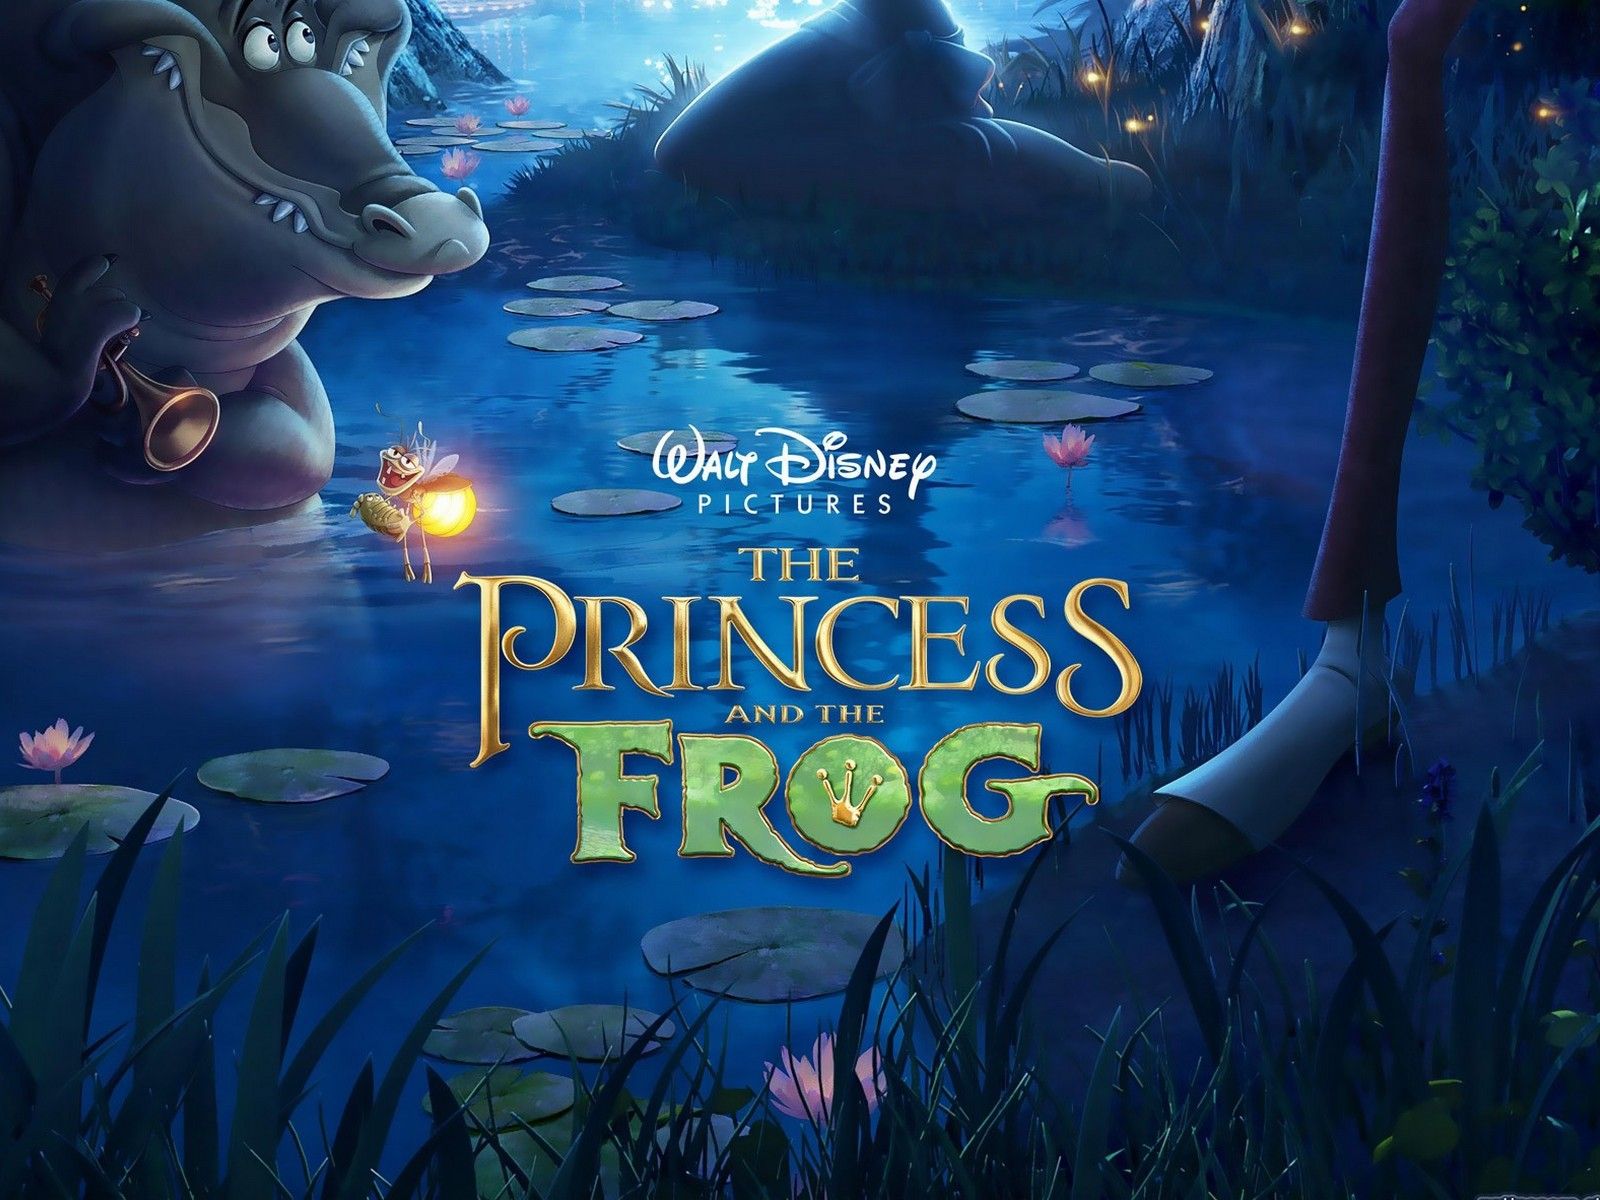 30 the princess and the frog Wallpaper backgrounds - Desktop